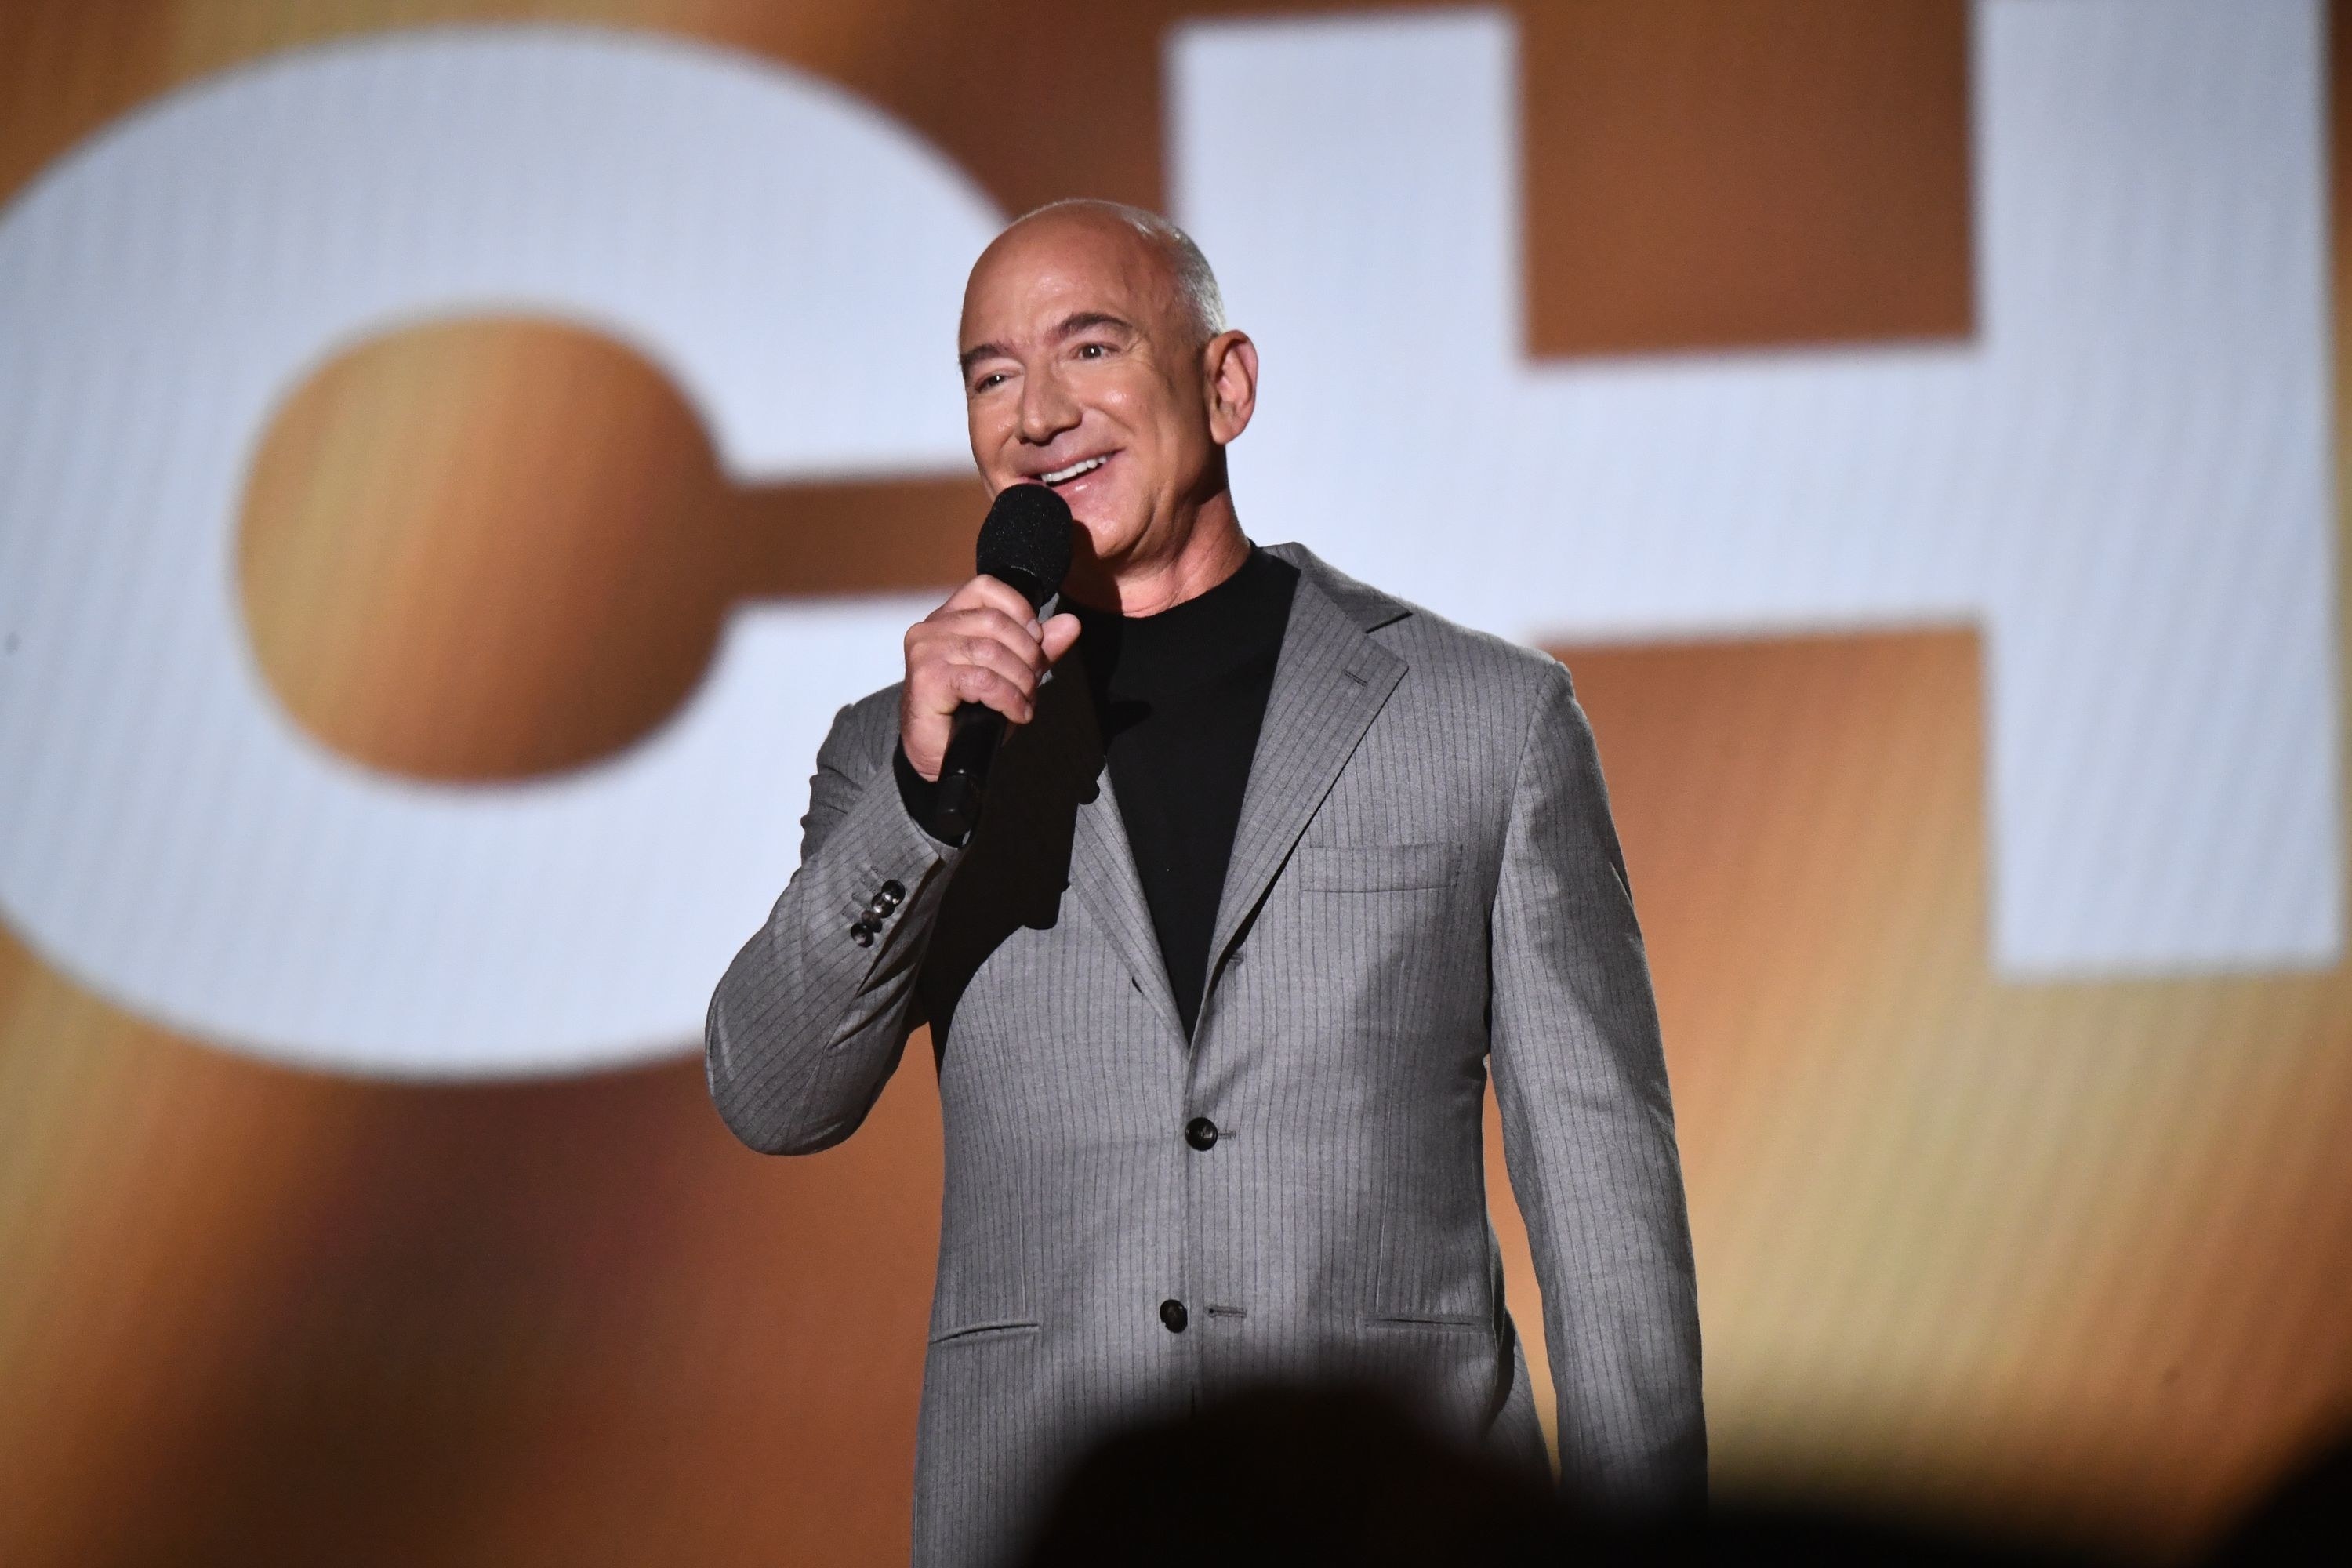 Jeff Bezos giving a speech on stage holding a microphone